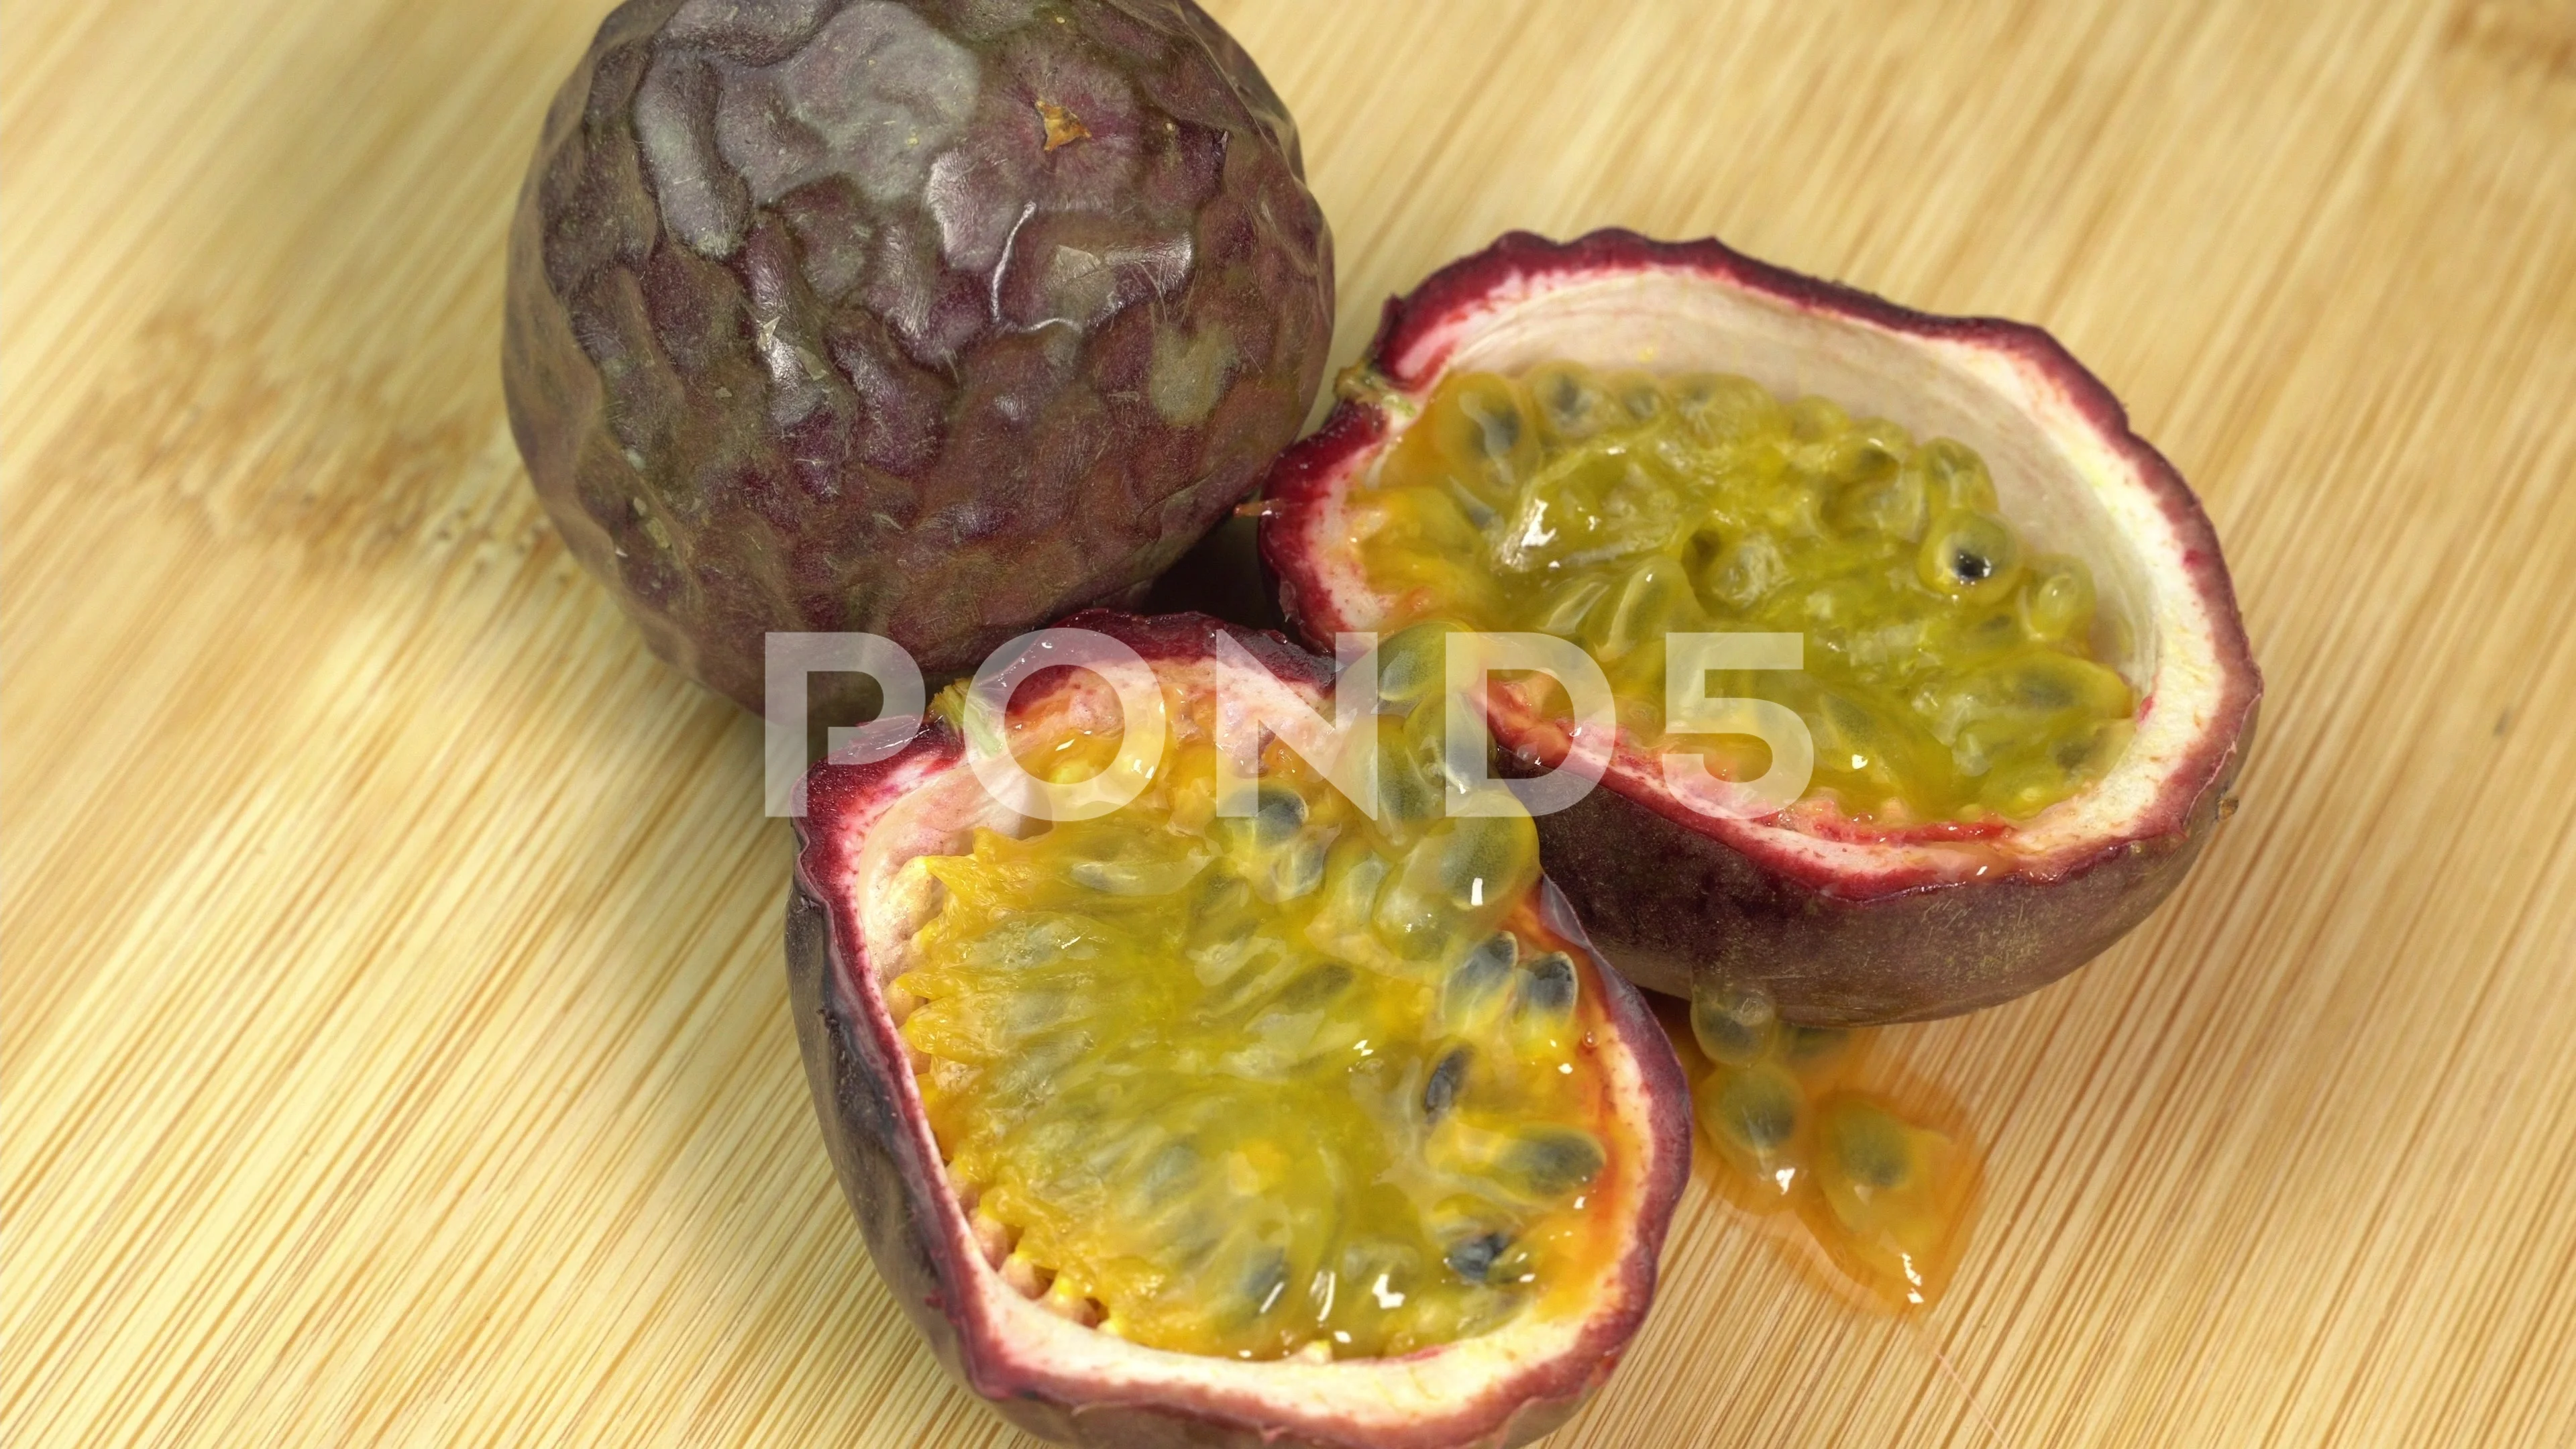 How to Cut & EAT PASSION FRUIT